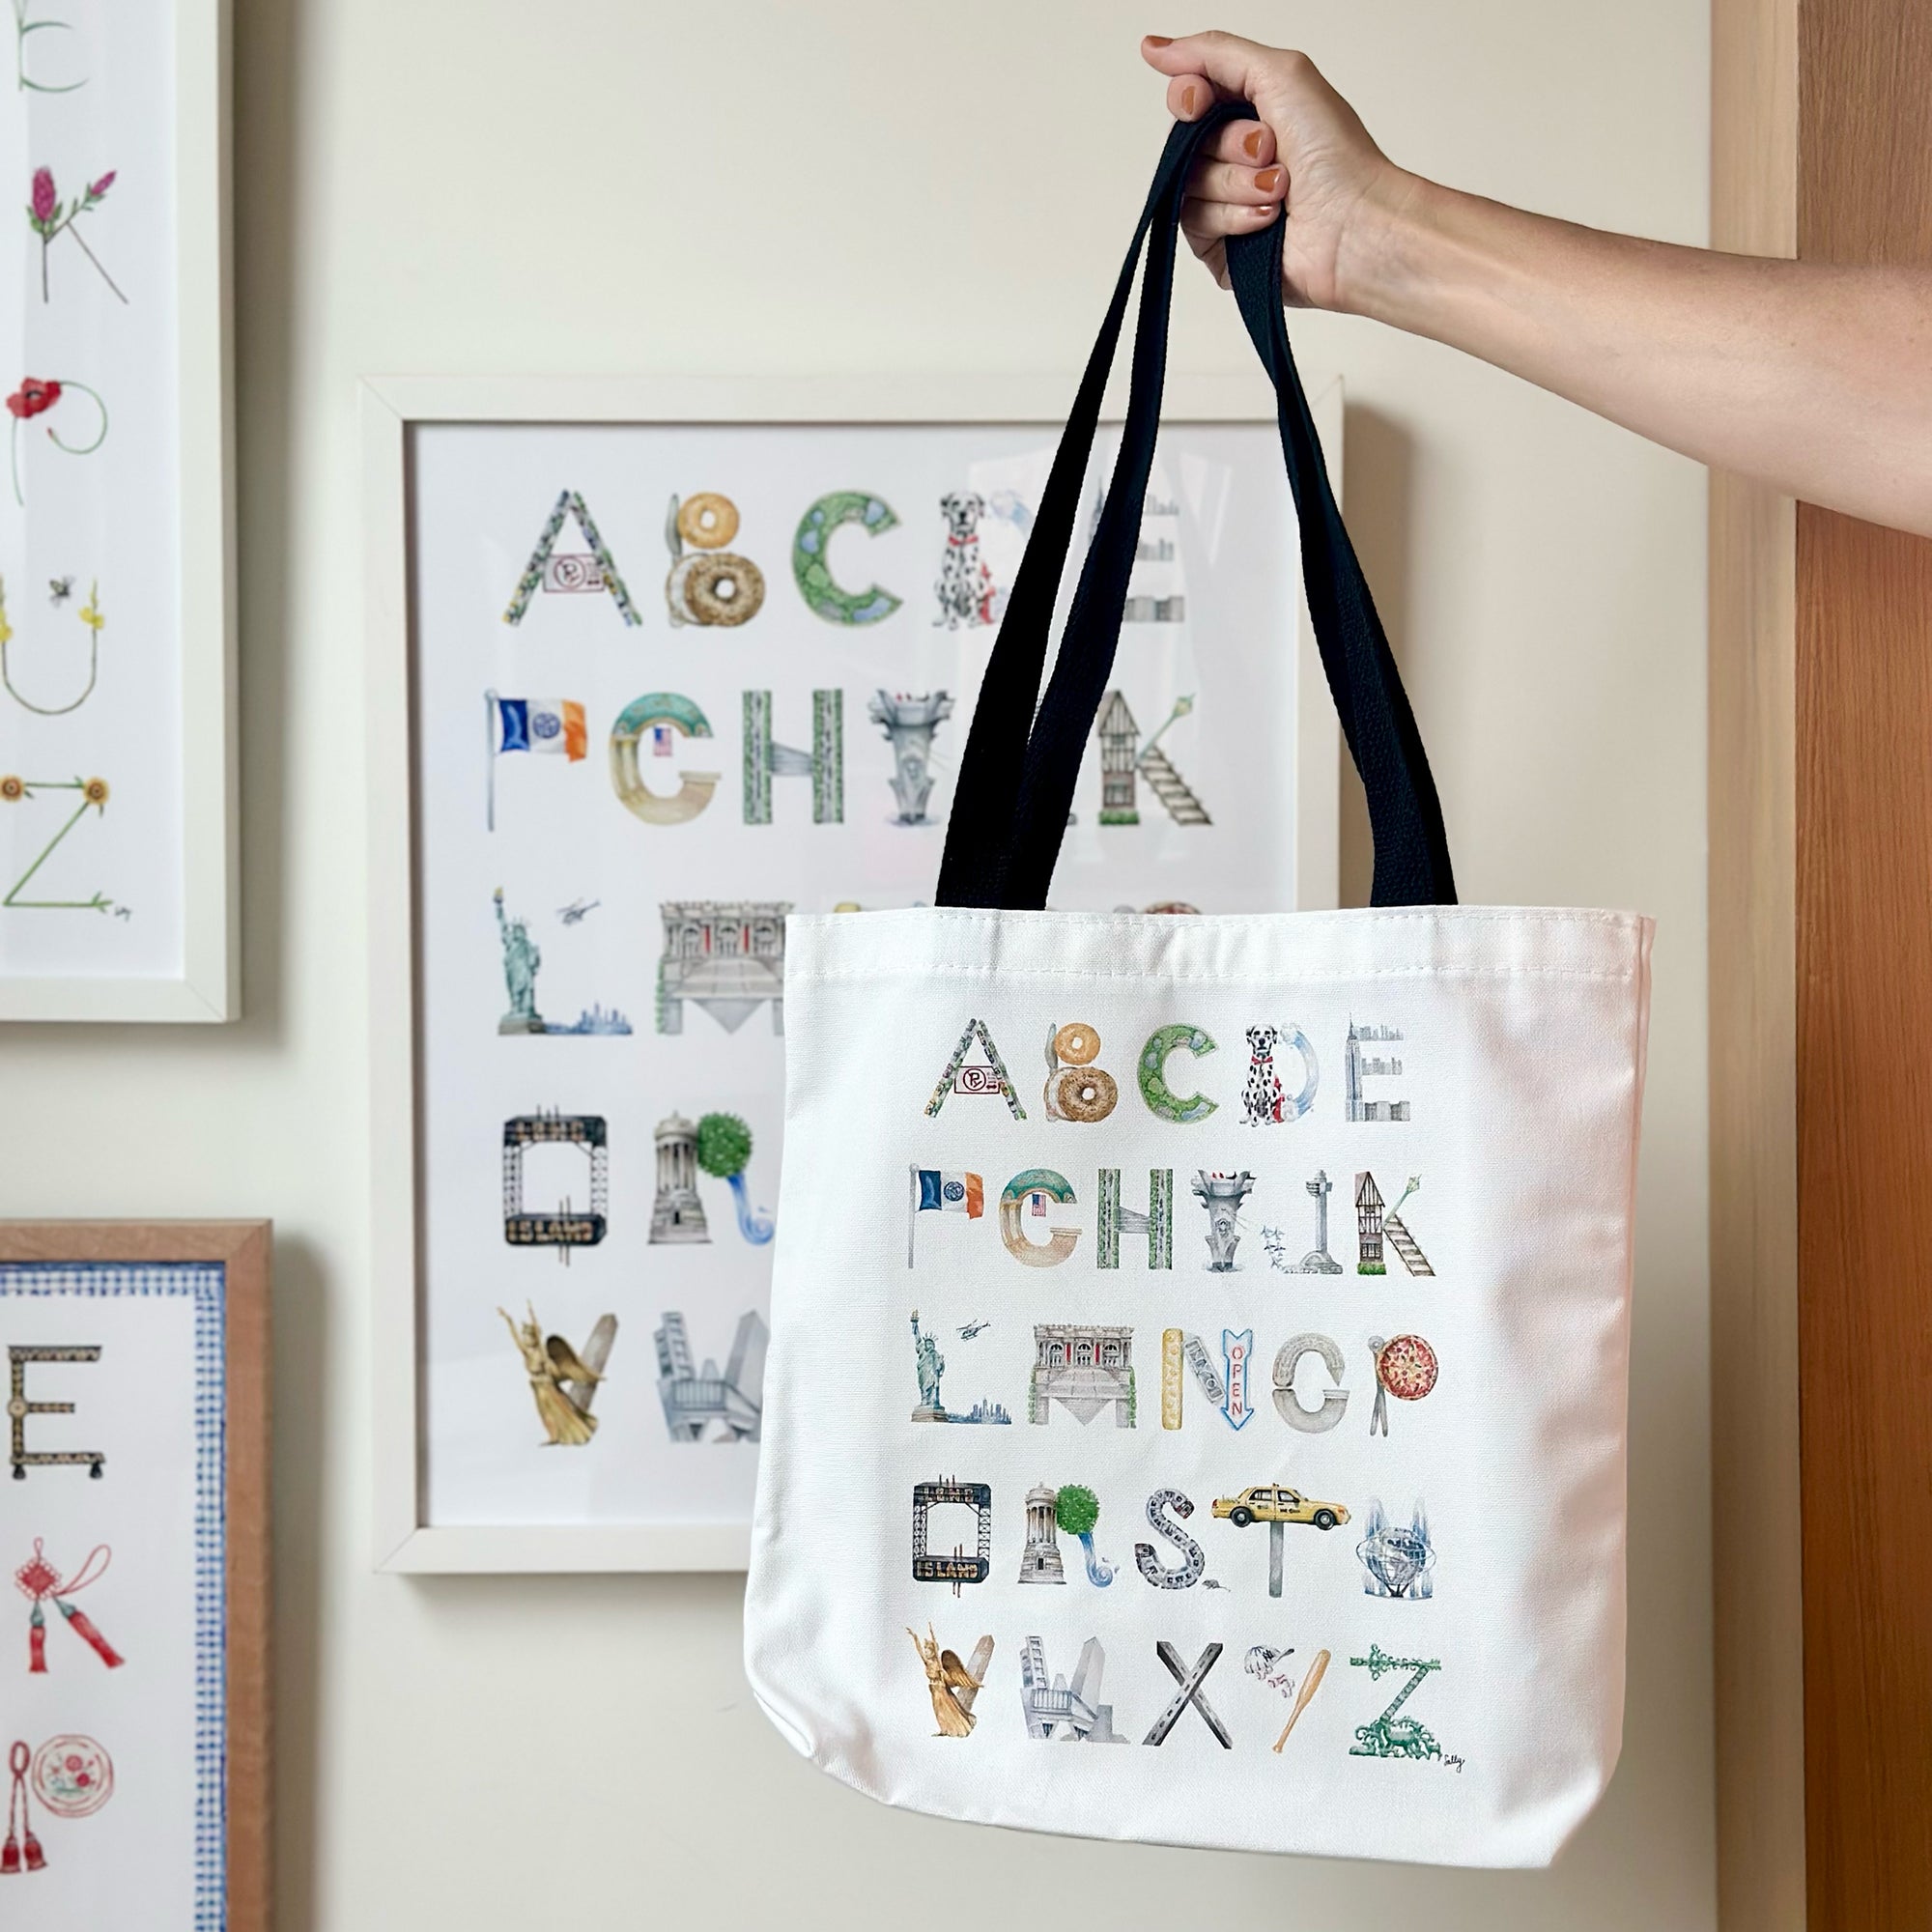 NYC Alphabet Tote on display against the NYC Alphabet Print